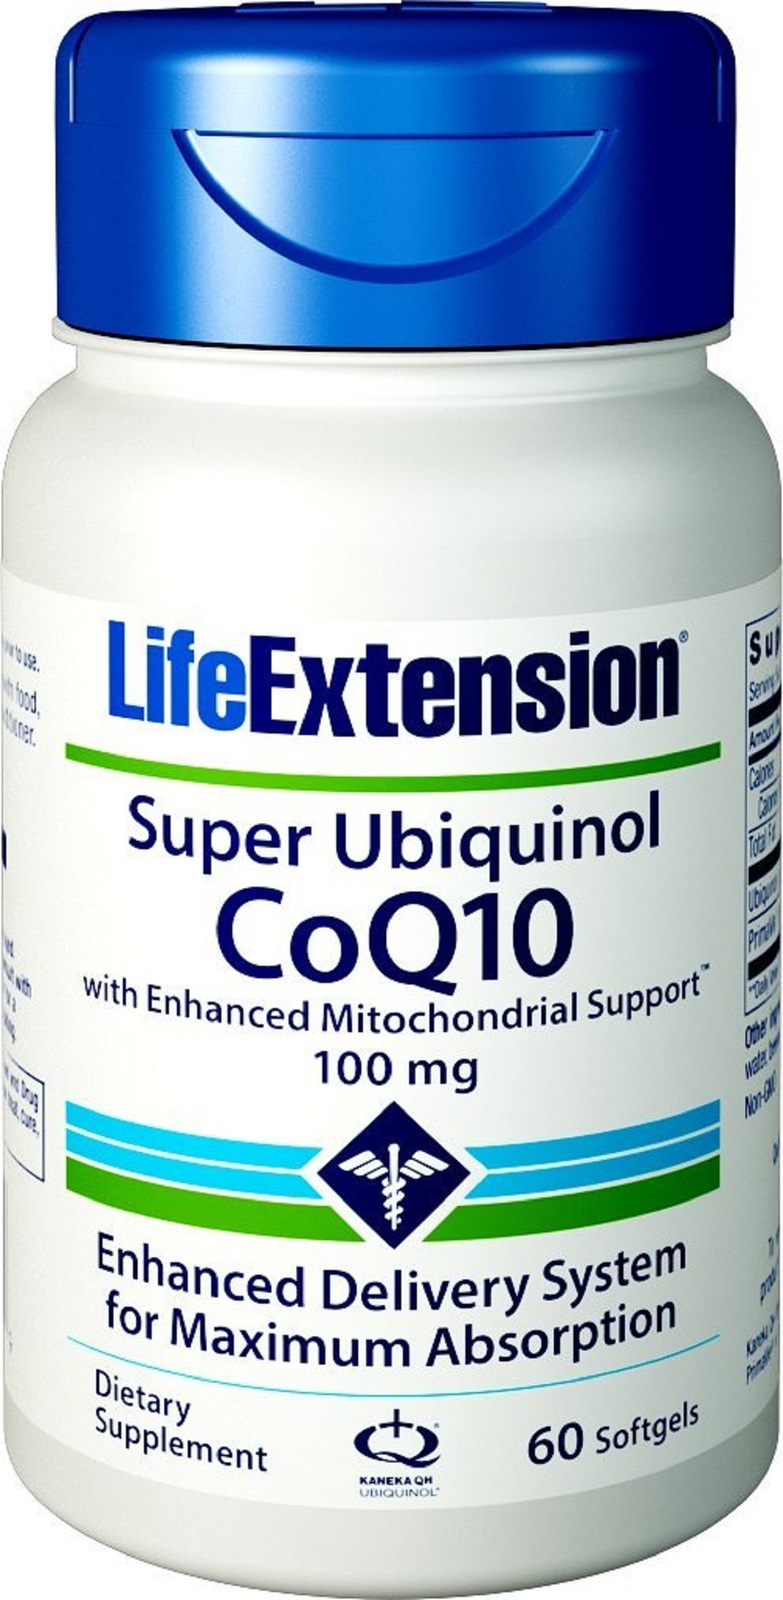 Super Ubiquinol COQ10 with Enhanced Mitochondrial Support 100 mg, 60 Count